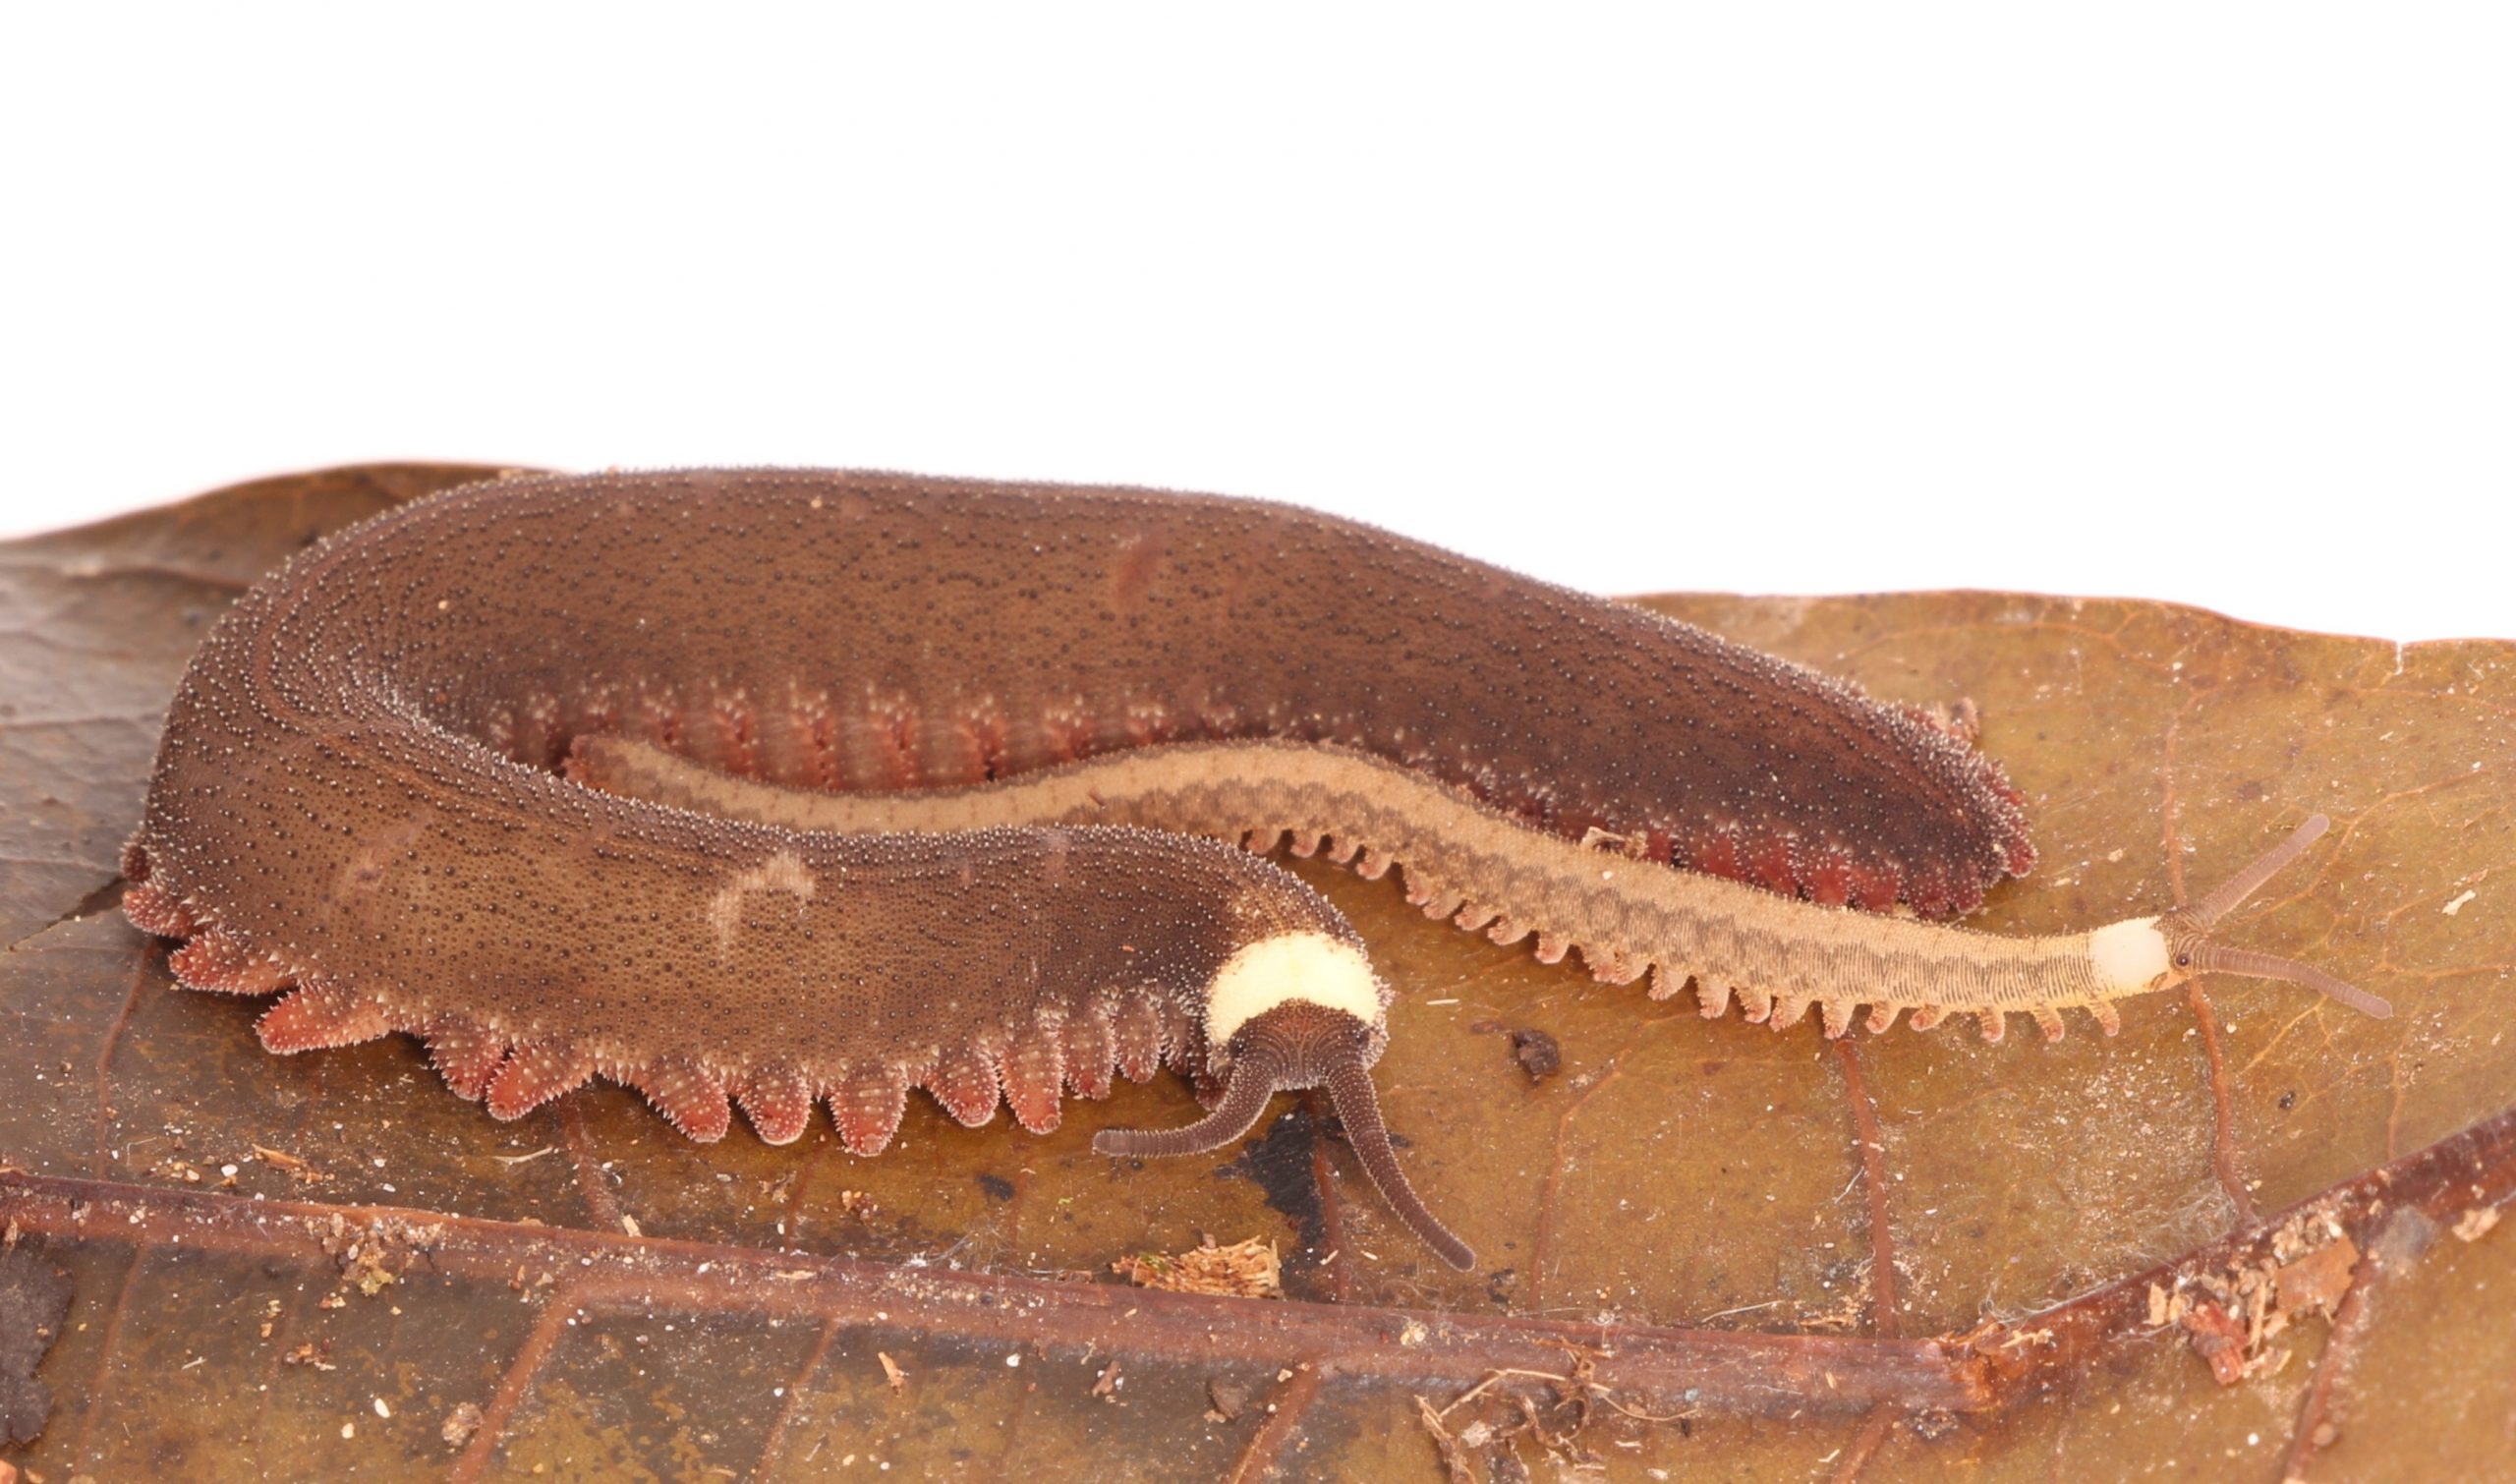 Cute but deadly: a new velvet worm species from Ecuador